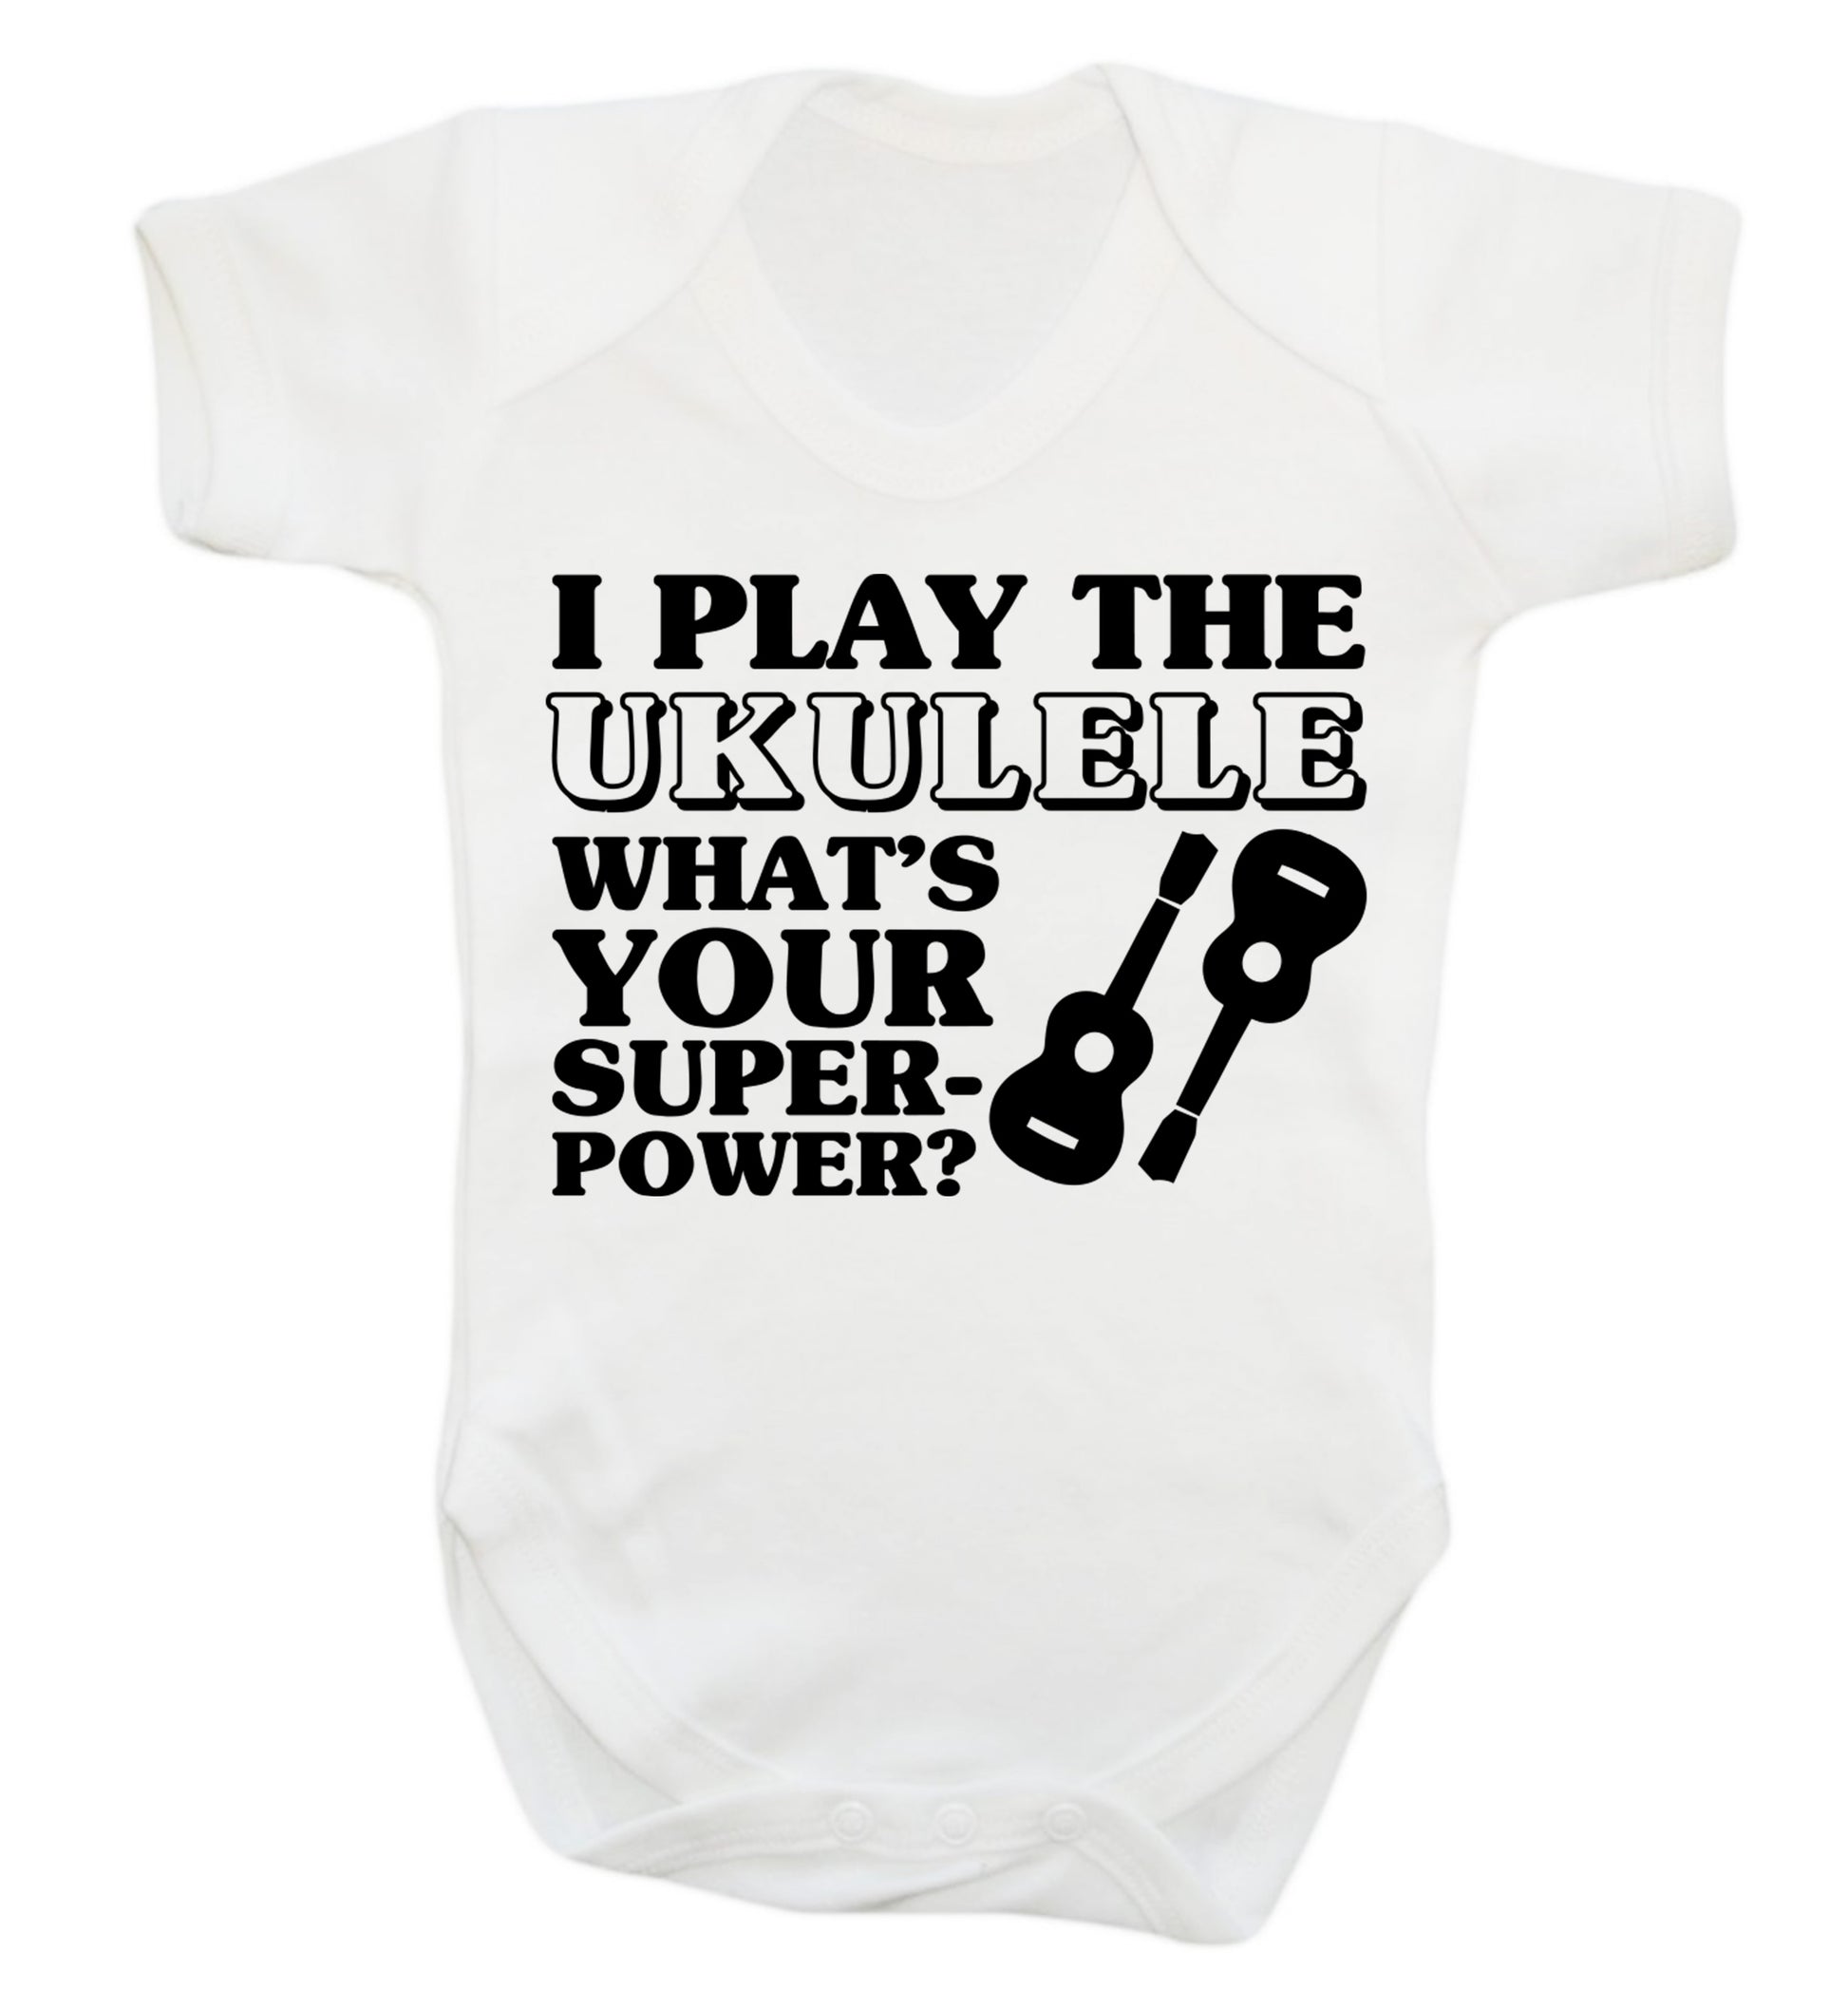 I play the ukulele what's your superpower? Baby Vest white 18-24 months